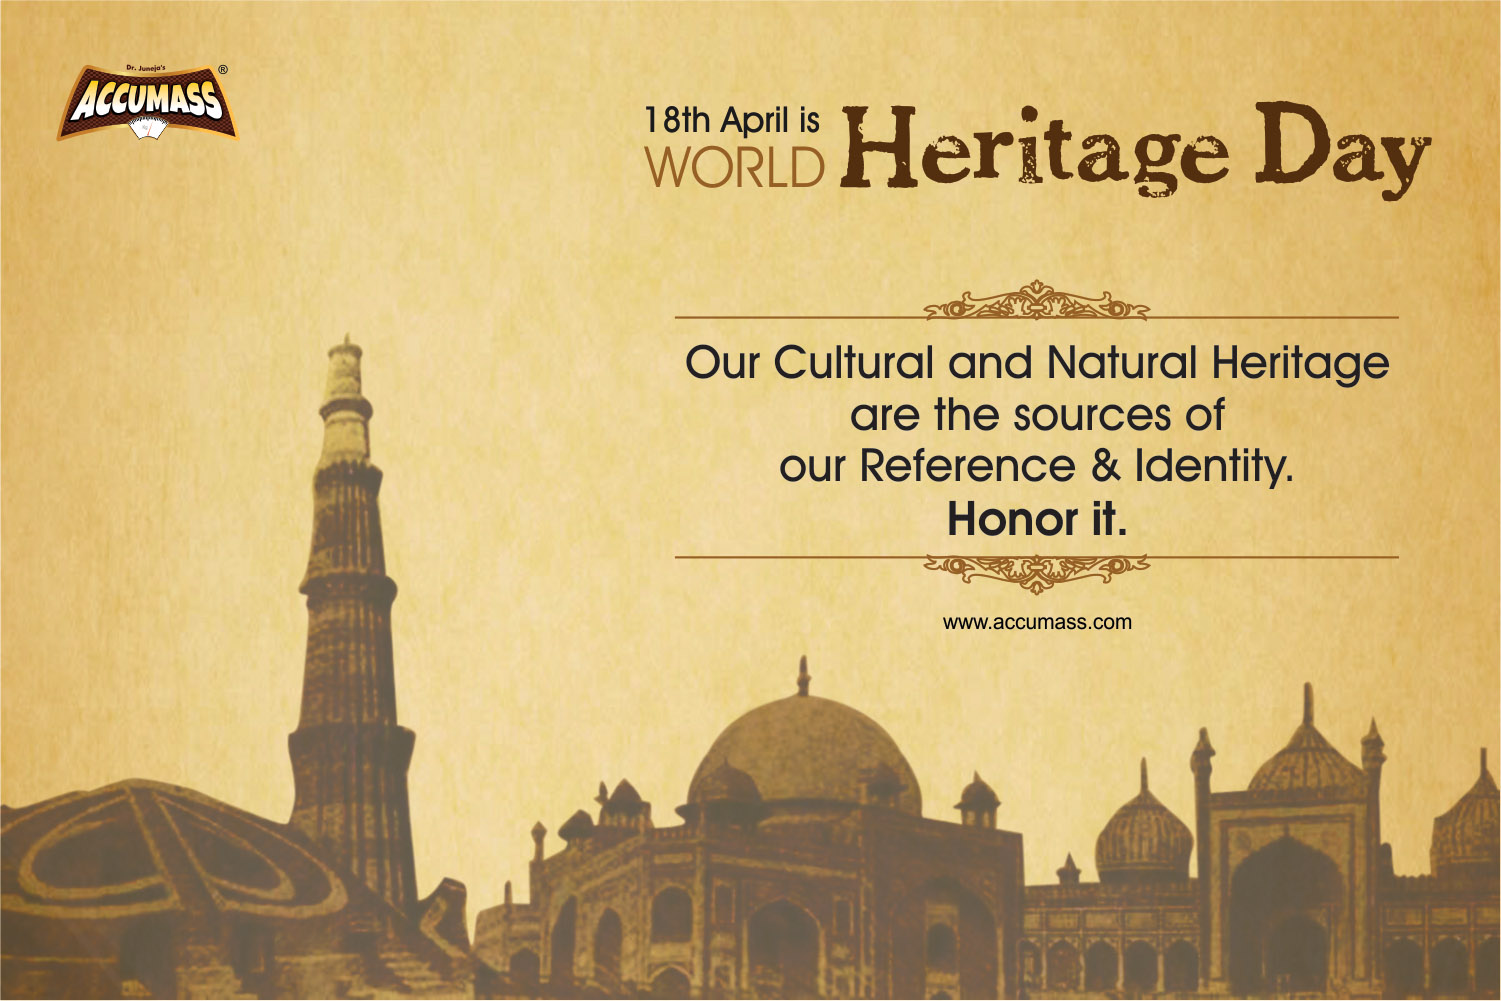 18 April 2018, World Heritage Day, Indian Festival, Accumass